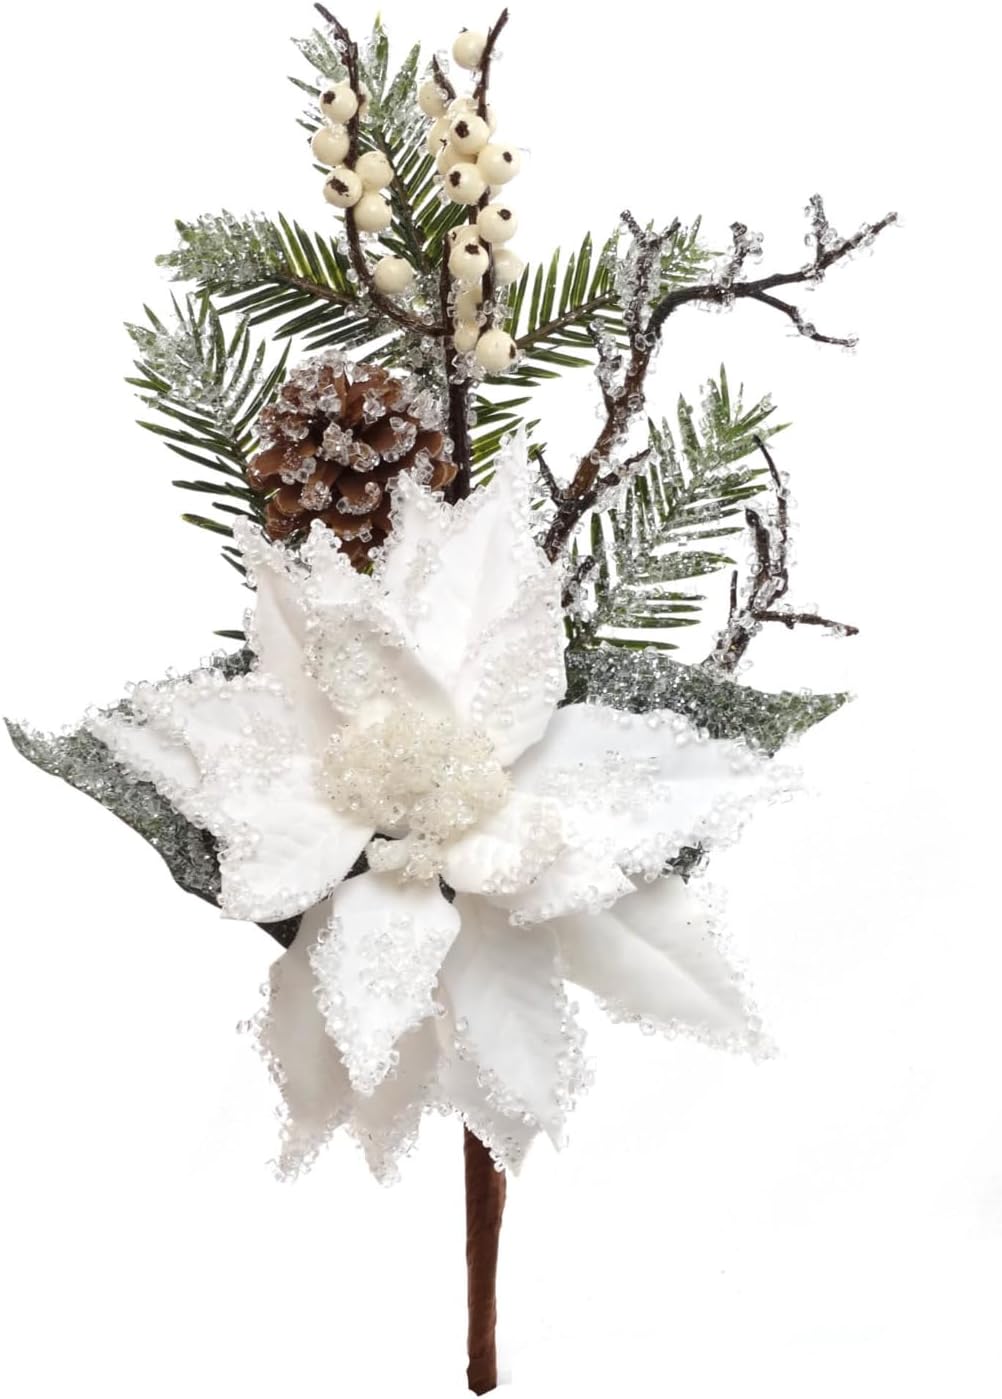 Iced White Poinsettia Pine Pick with Lifelike Silk Flowers, Twigs, Berries, & Pine Cones | 16-Inch | Holiday Xmas Accents | Christmas Picks | Home & Office Decor (Set of 12)